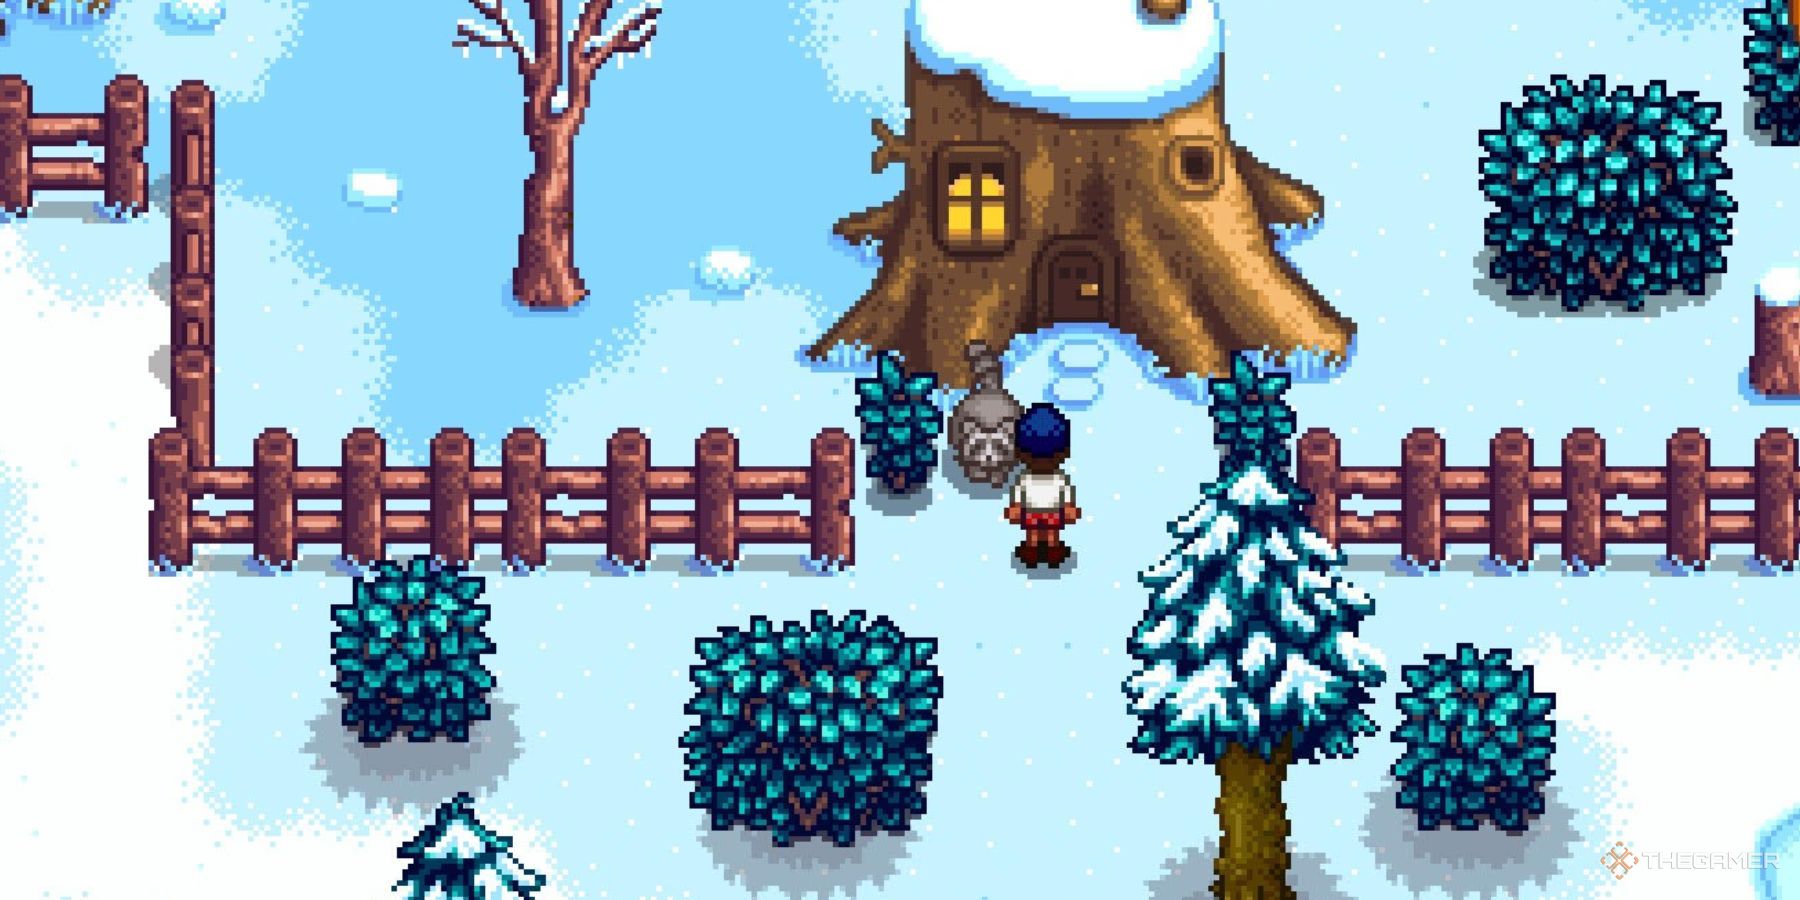 A character stands in front of the Raccoon Shop in Stardew Valley.